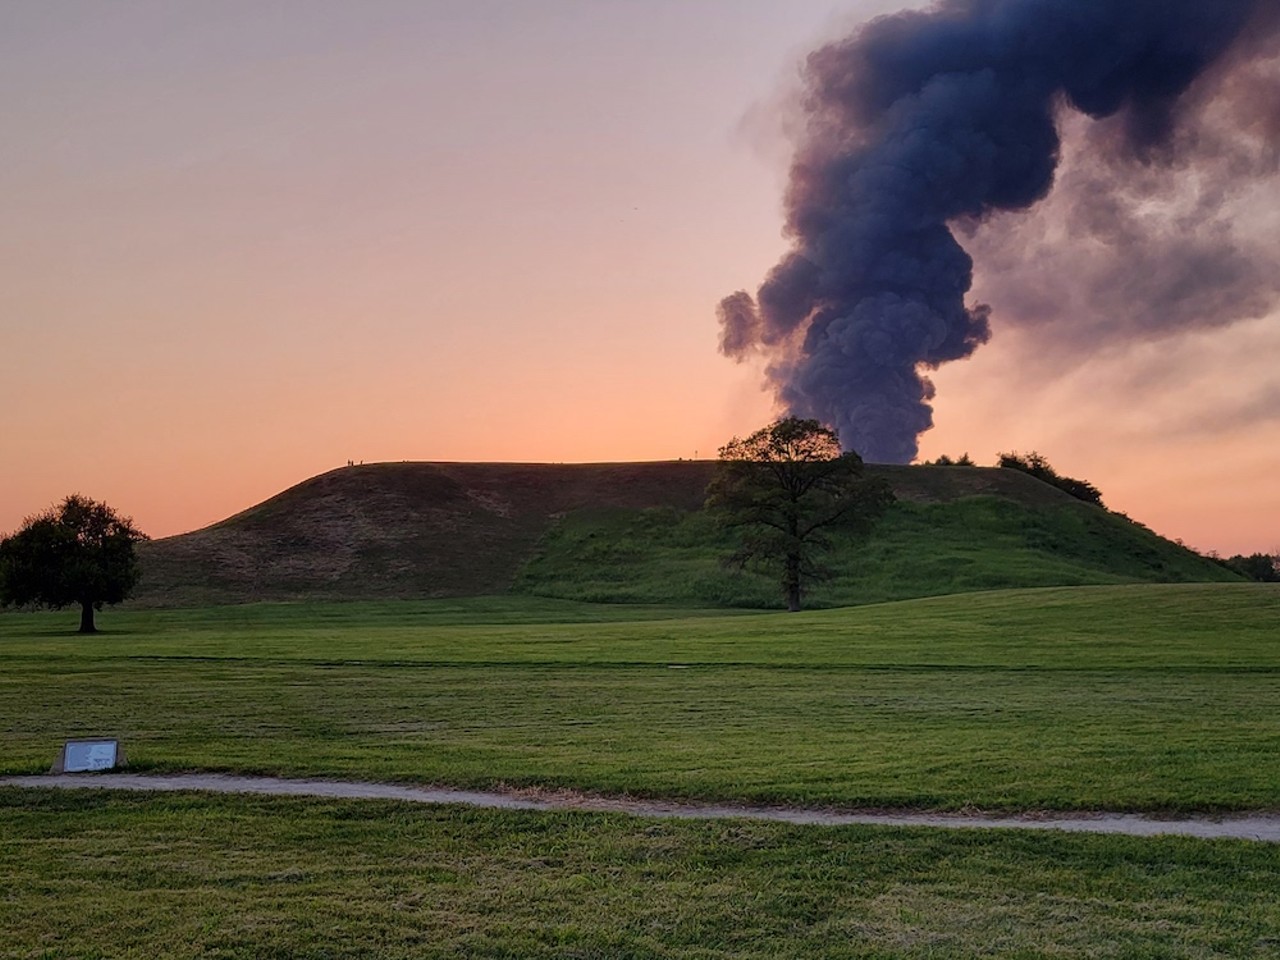 Cahokia Mounds
Caroline C, 3 stars
"Not very exciting, but pretty significant."